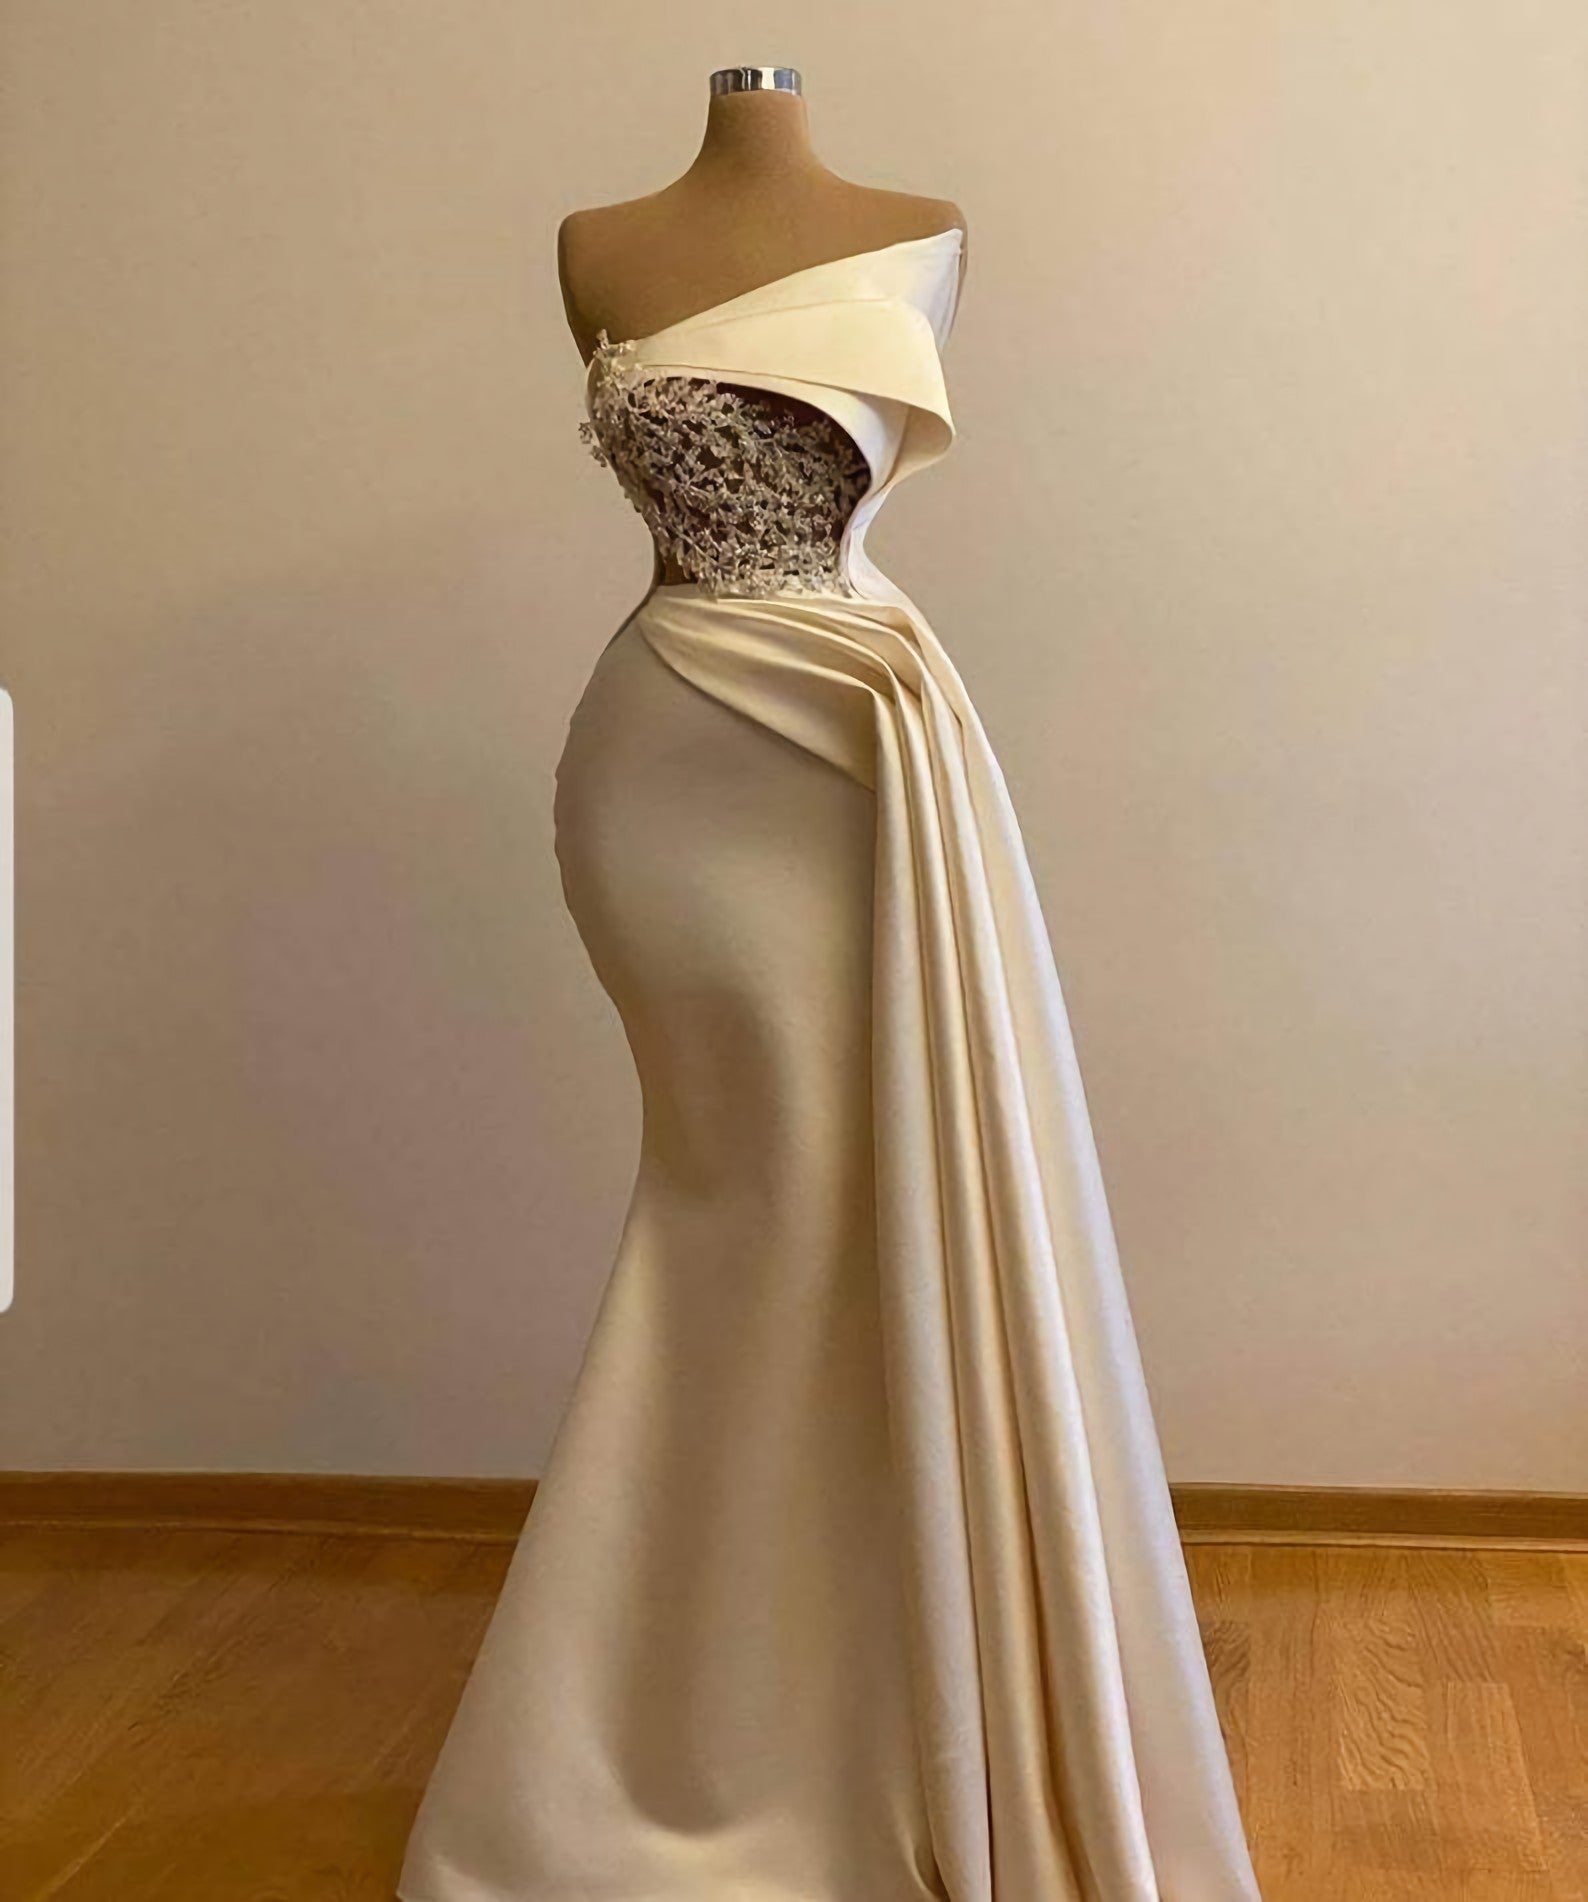 Wedding Dress Spring, Off Shoulder Ivory Prom Dress With Cape Wedding Gown Bridal Dress, Long Ivory Engagement Dress, African Clothing For Women Porm Dress